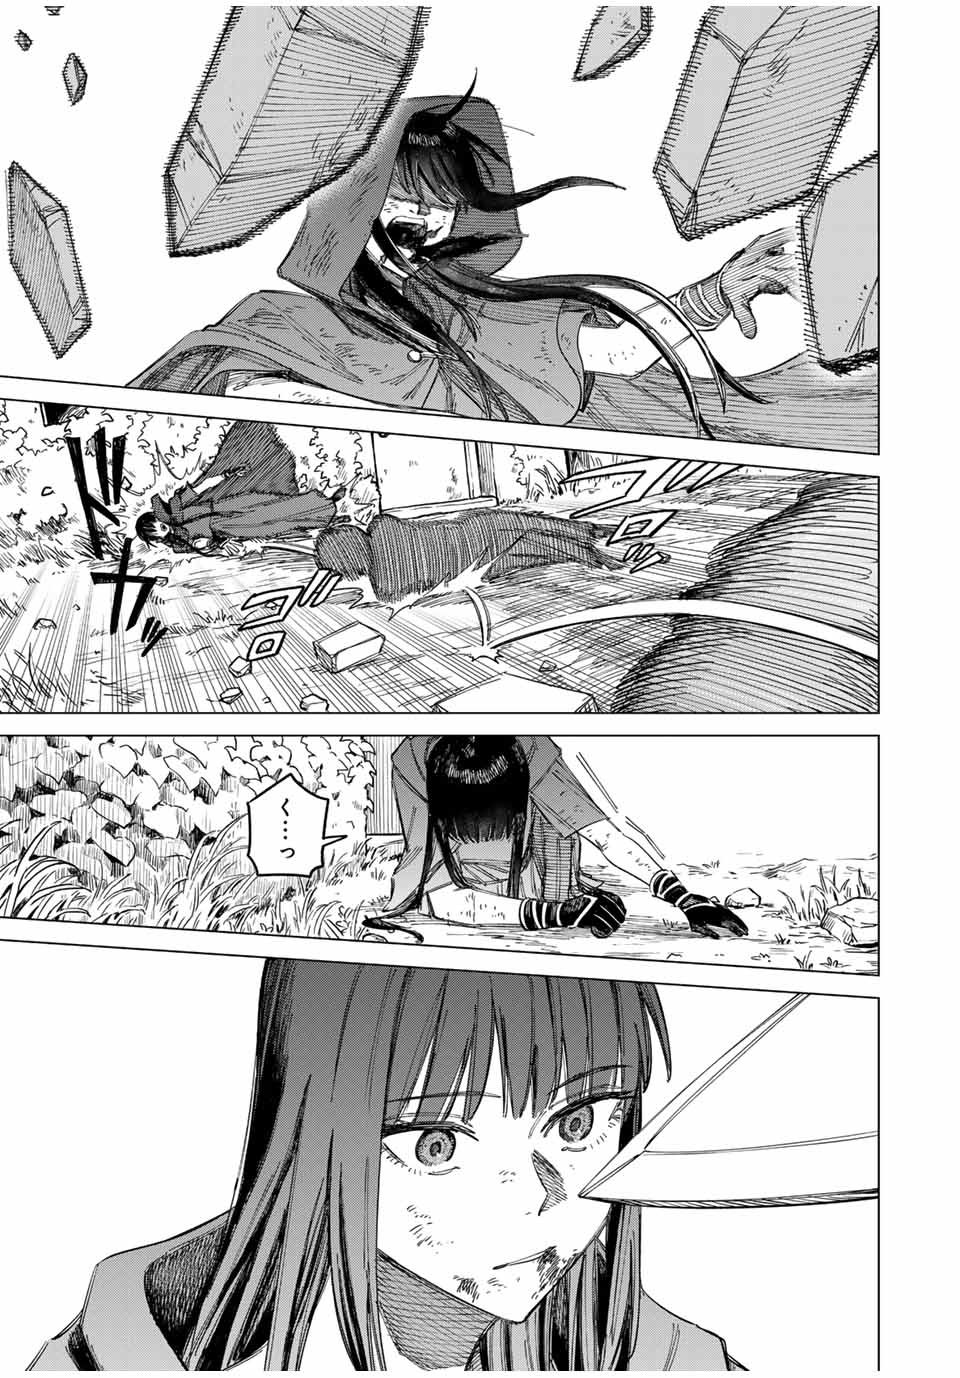 Witch and Mercenary 魔女と傭兵 第1.2話 - Page 19